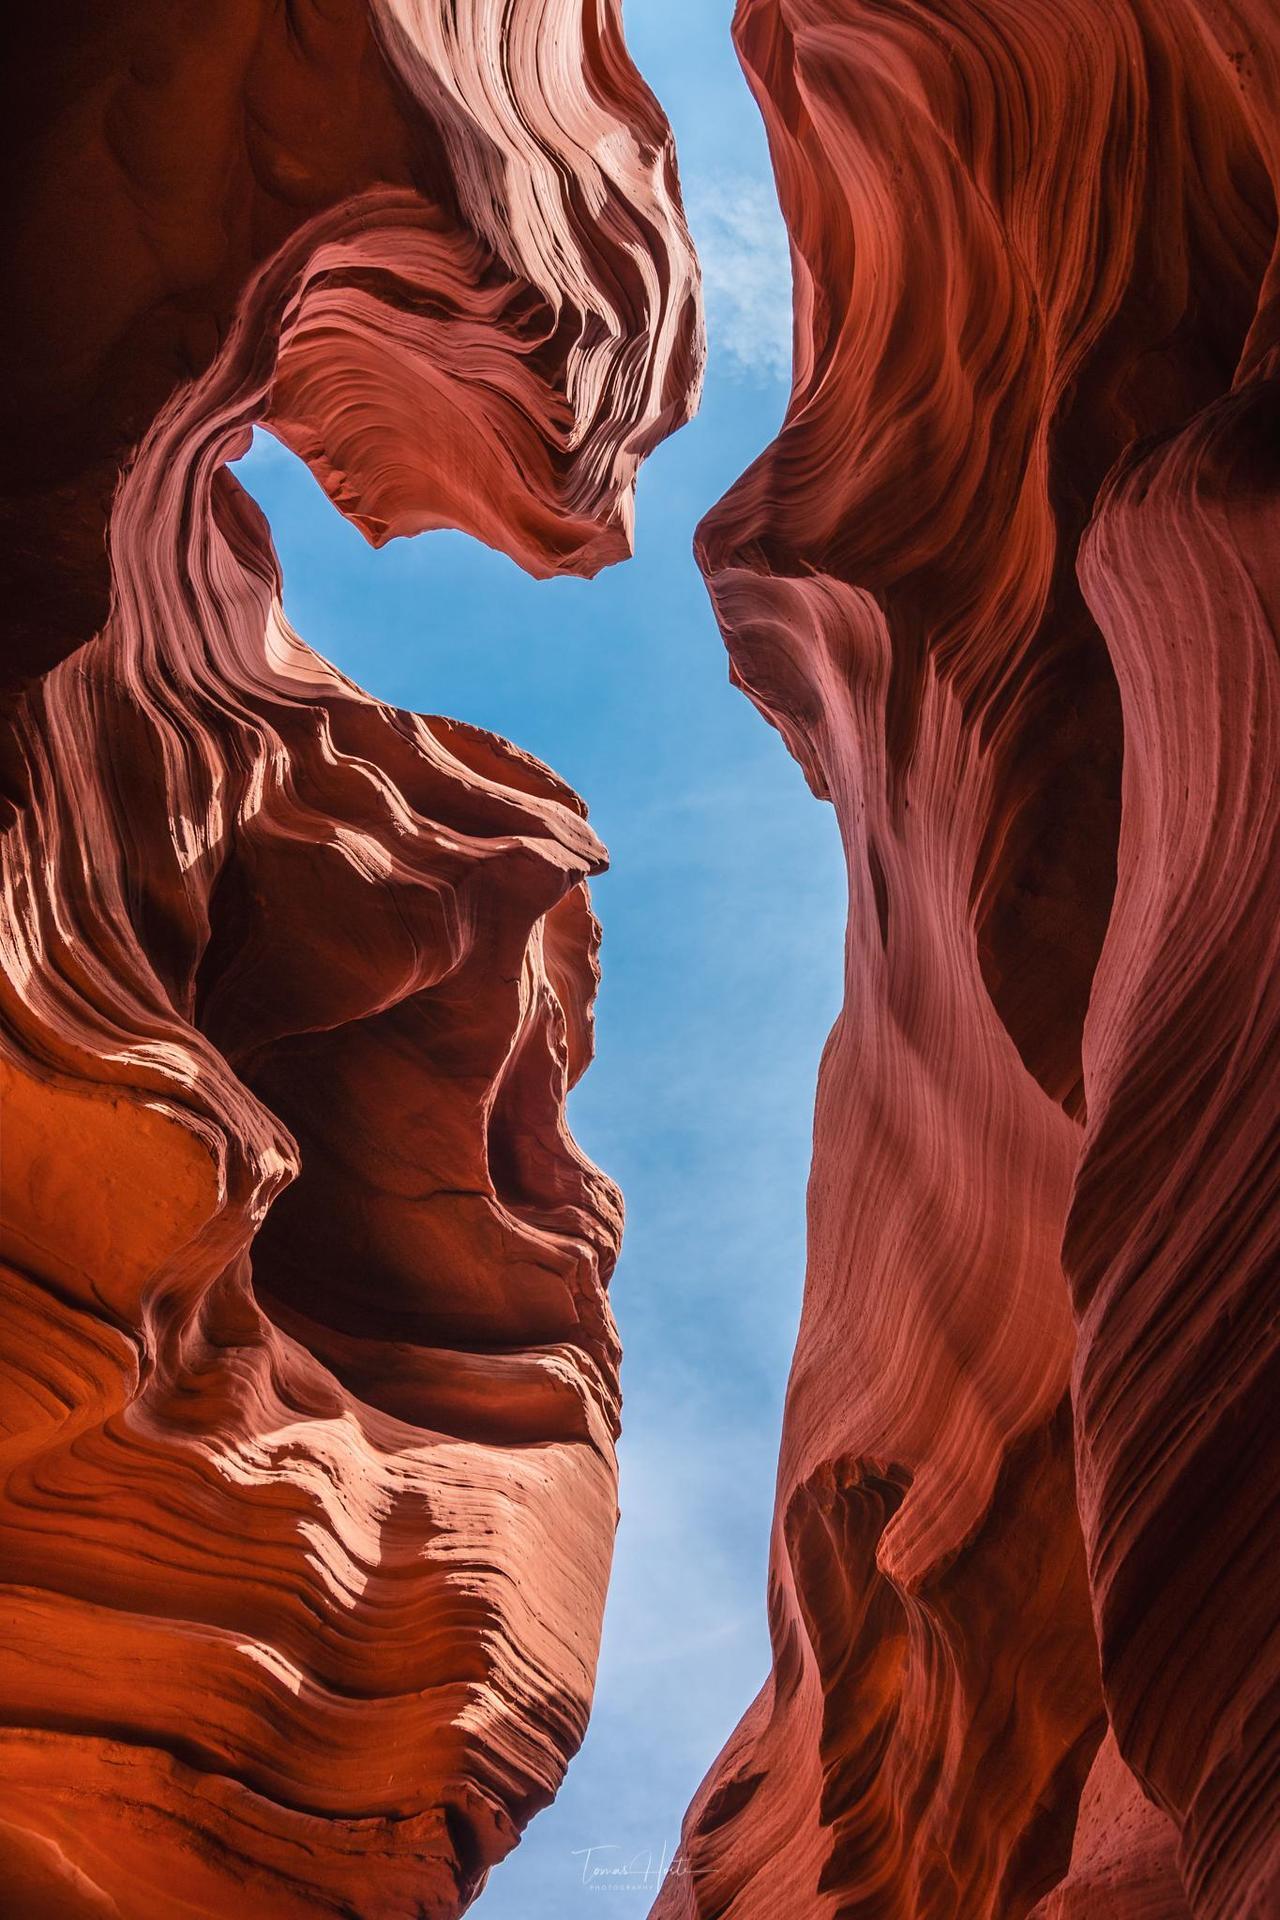 Incredible image of the inside of a canyon in Utah